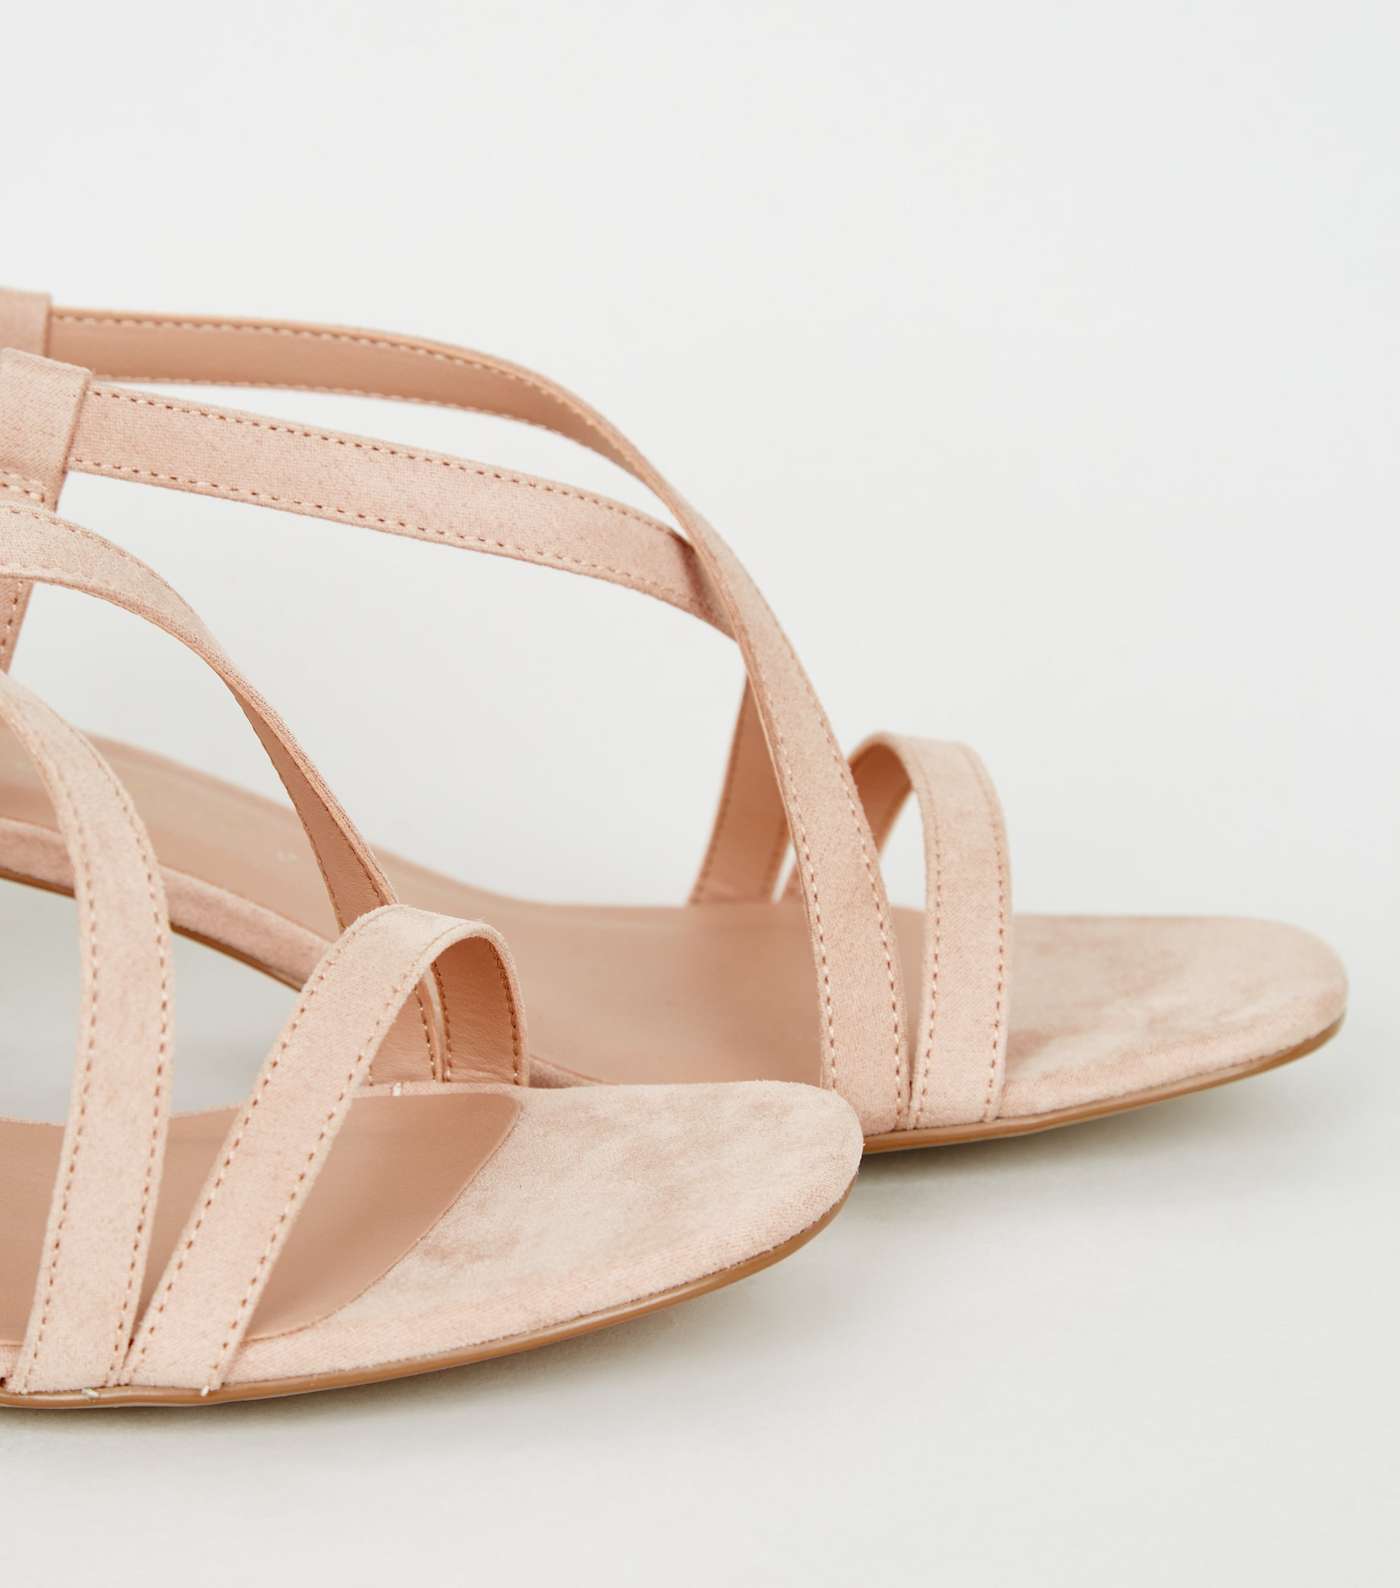 Wide Fit Pale Pink Suedette Strappy Low Heel Sandals Image 4